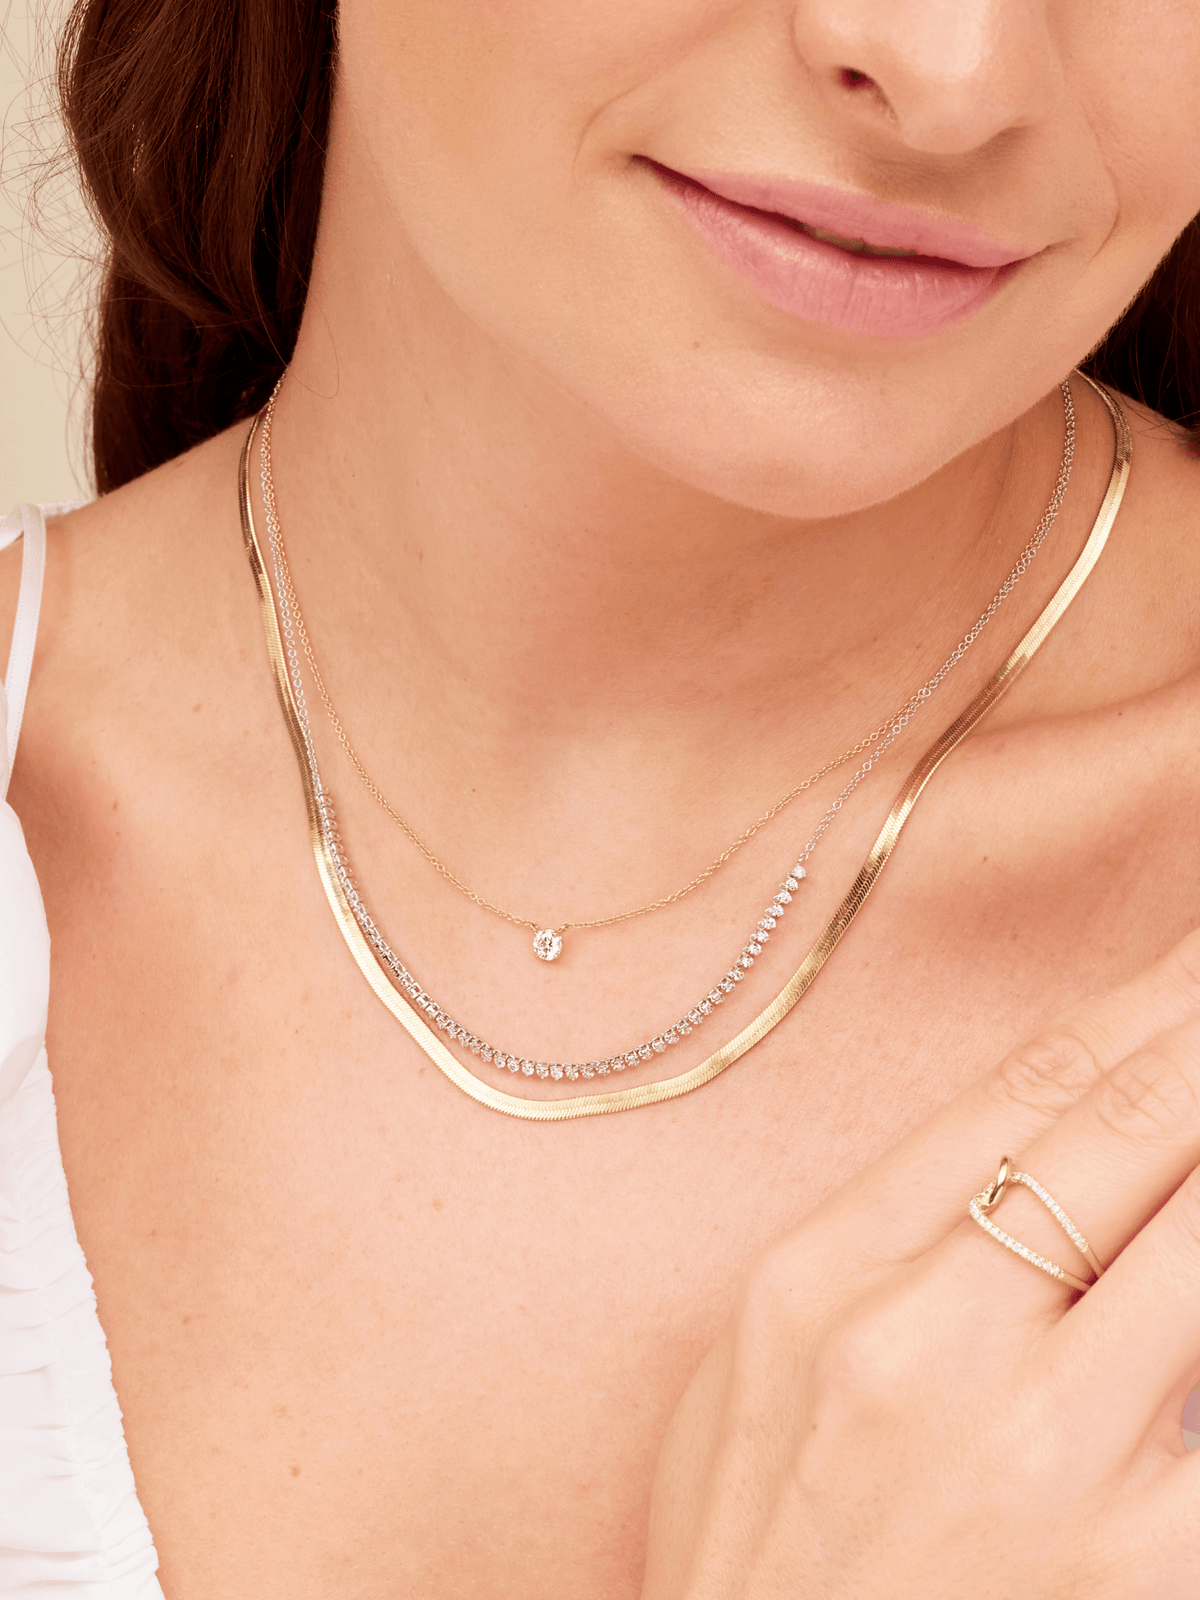 Round diamond pendant necklace layered with diamond tennis chain necklace and gold snake chain